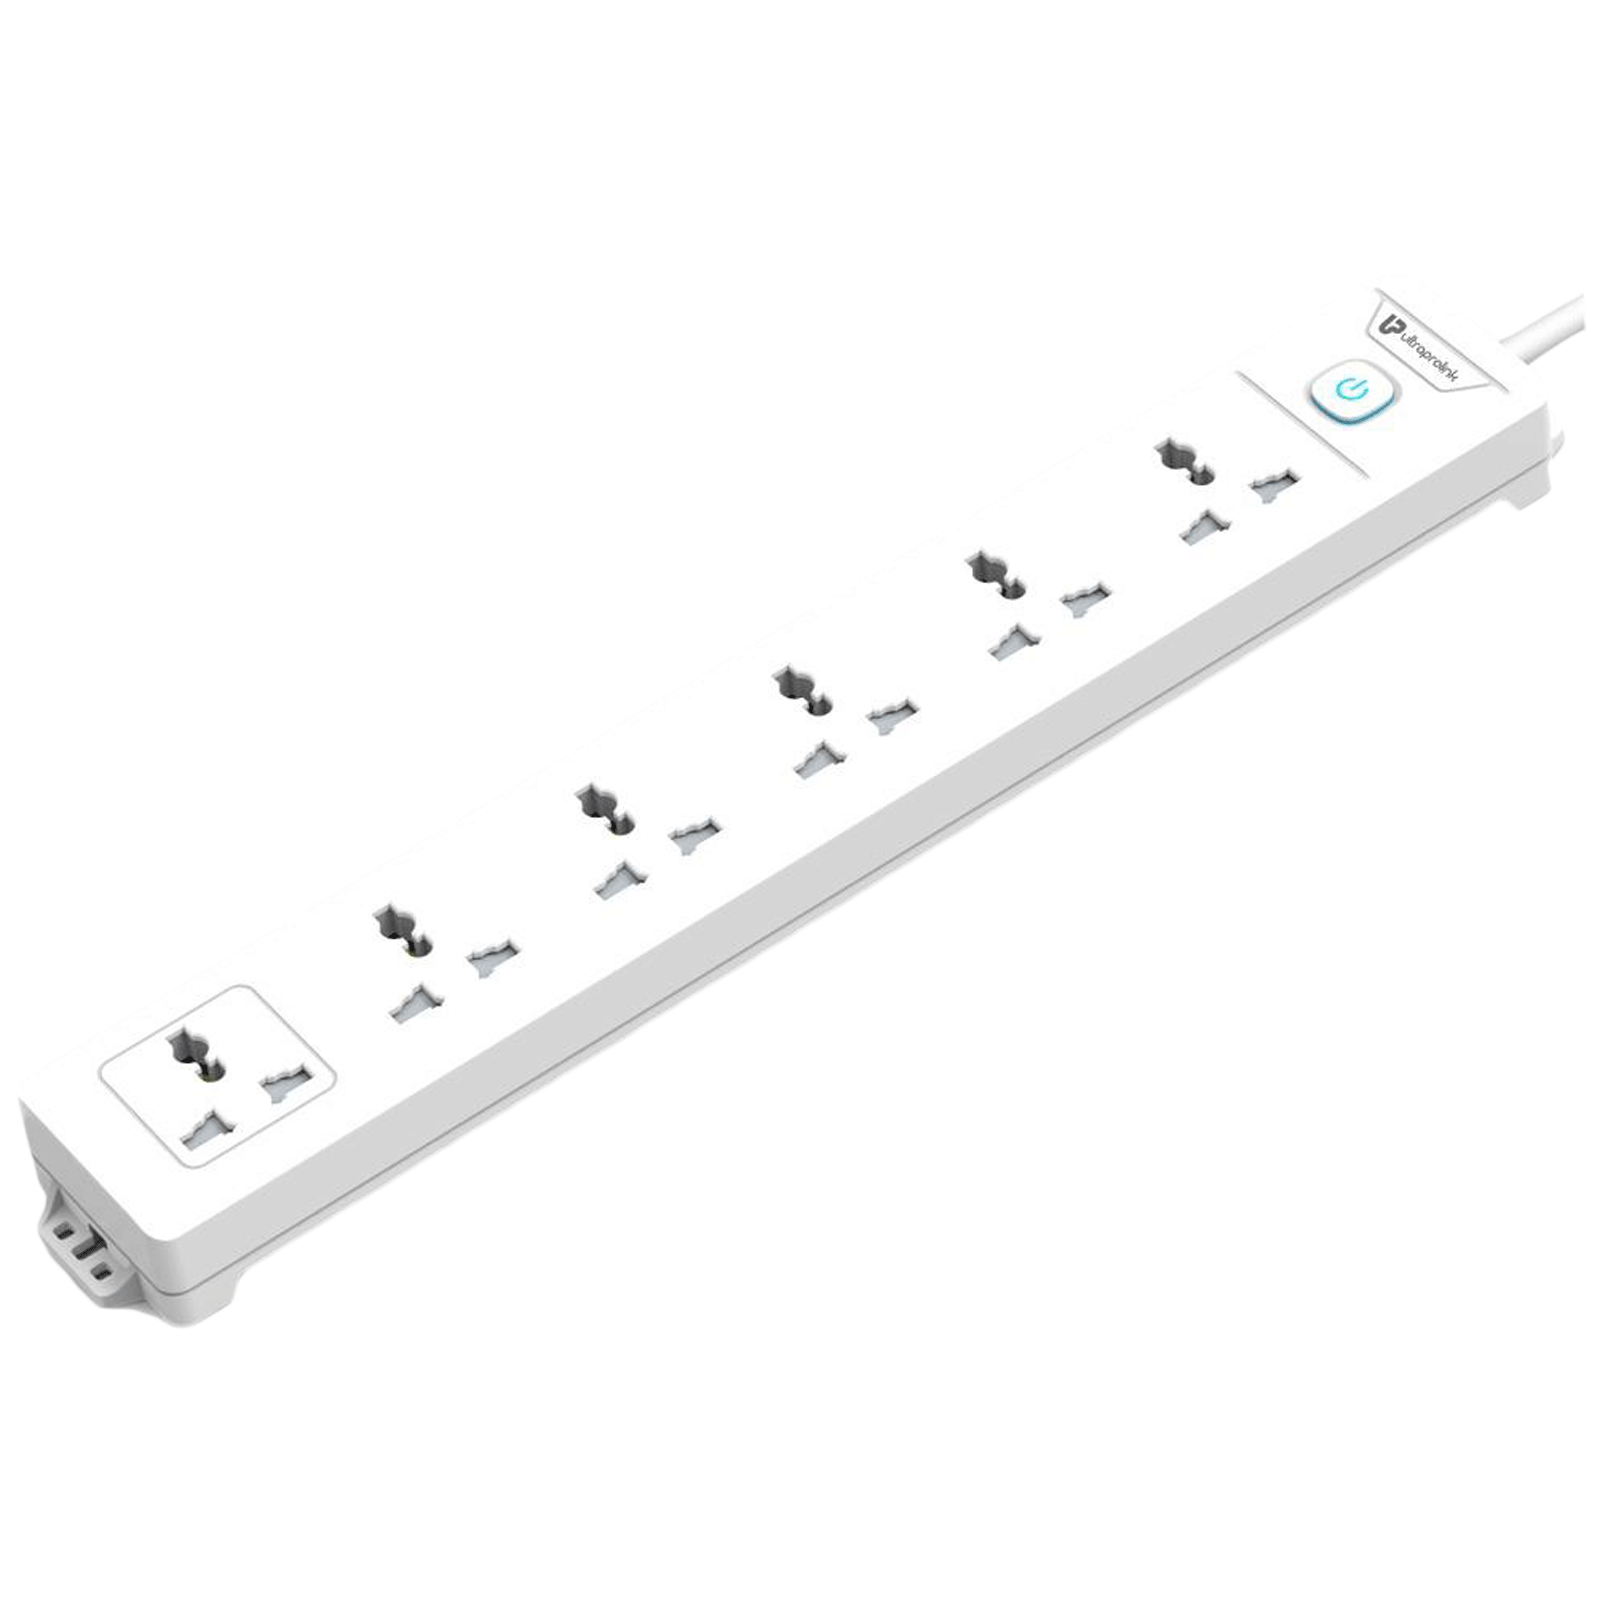 UltraProlink 10000 Amps 6 Sockets Surge Protector With Individual Switch (2 Meters, Fire Retardant Material, UM1048, White)_1